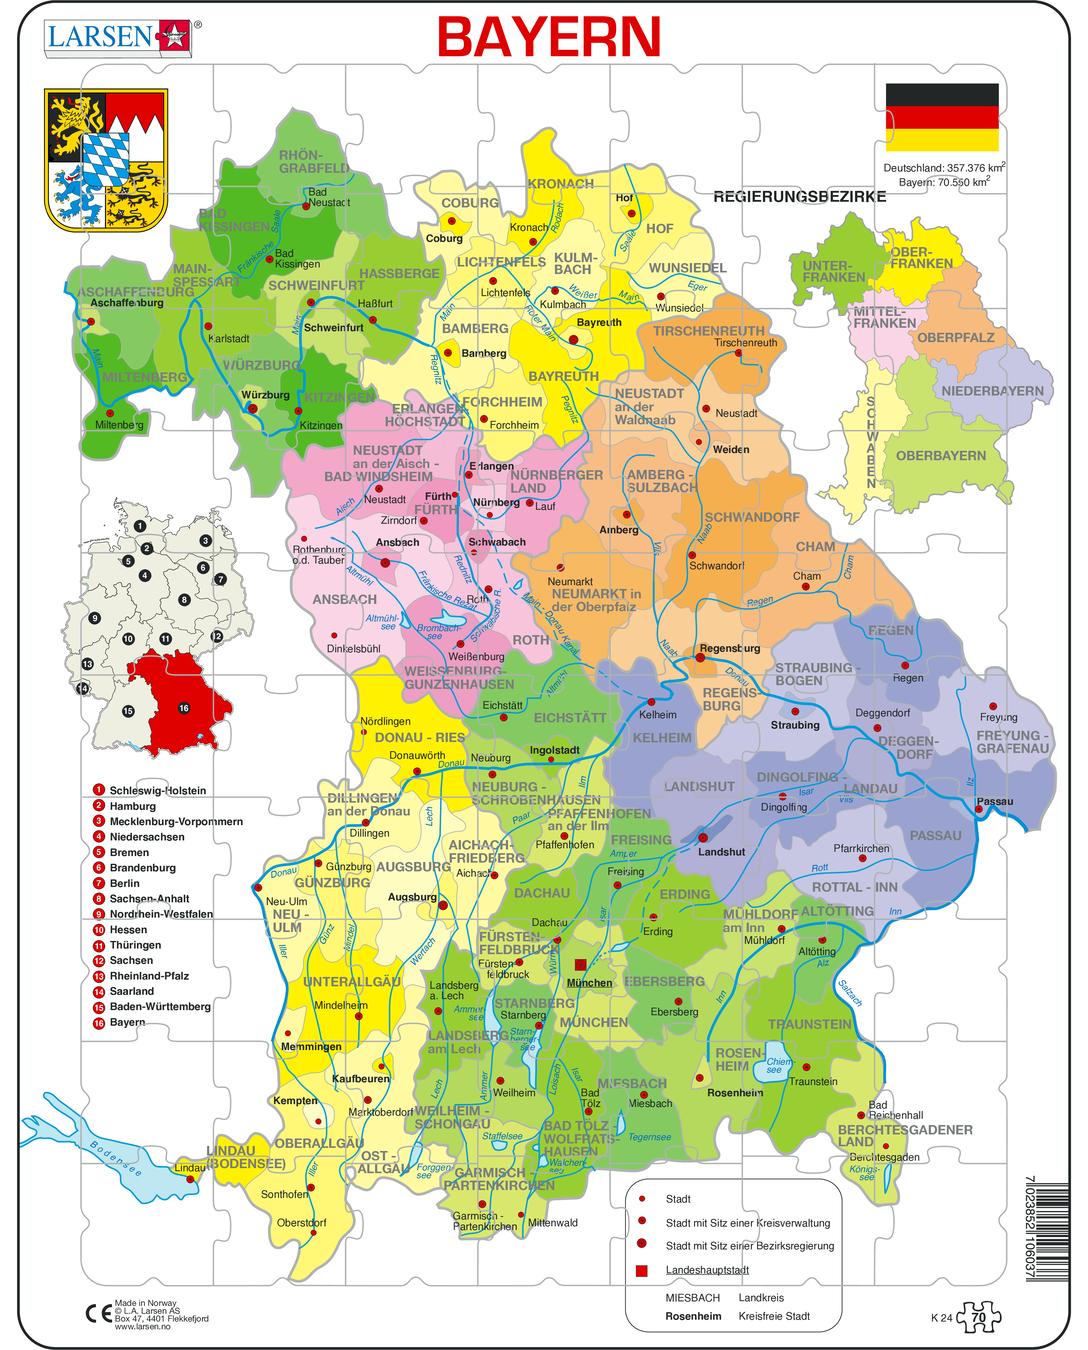 K24 Freistaat Bayern Political Other Maps Puzzles Larsen Puzzles 0373